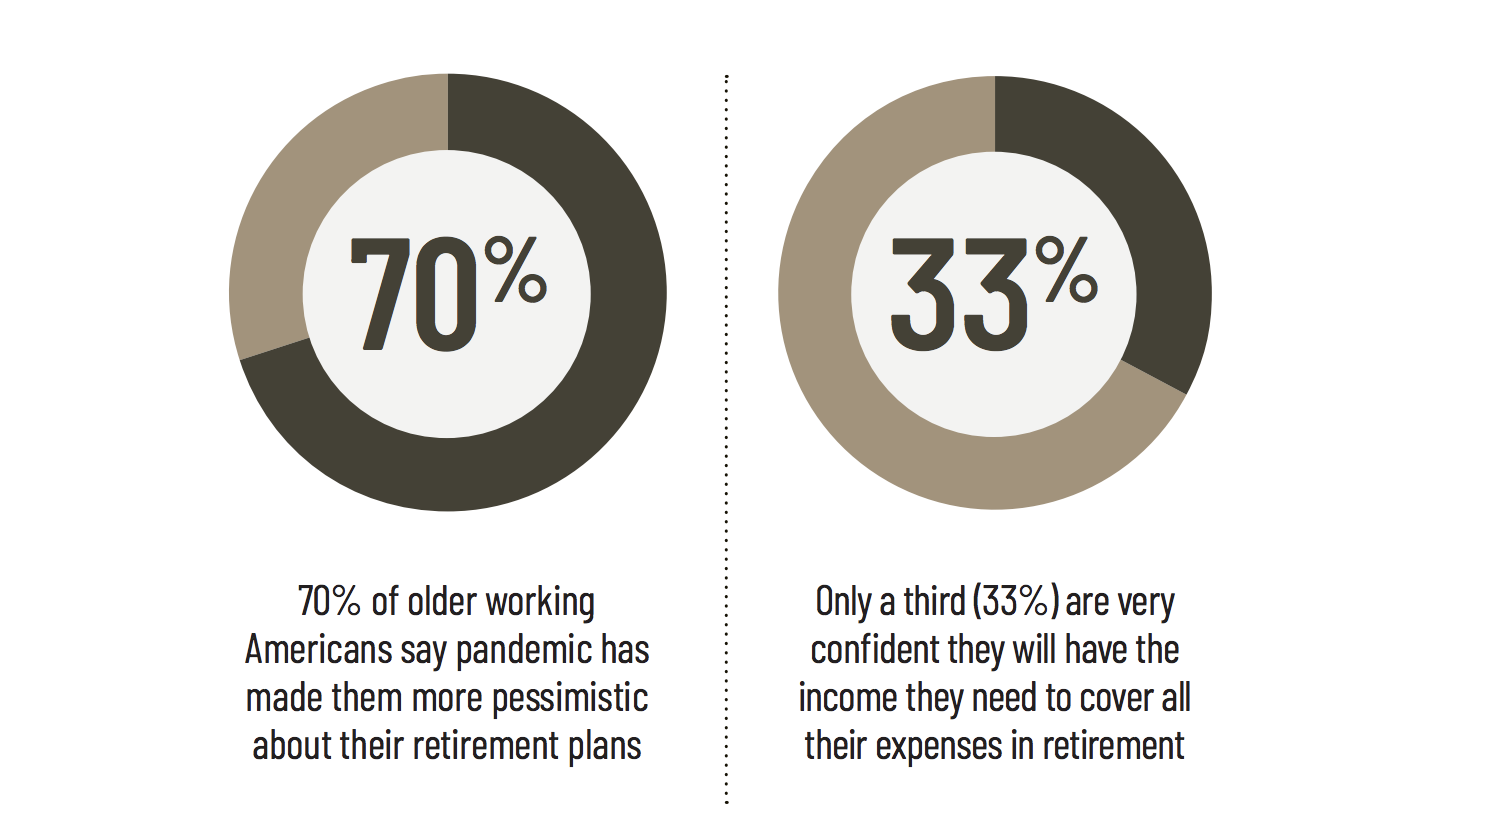 Americans Pessimistic About Retirement Plans Due to Pandemic, Alliance for Lifetime Income